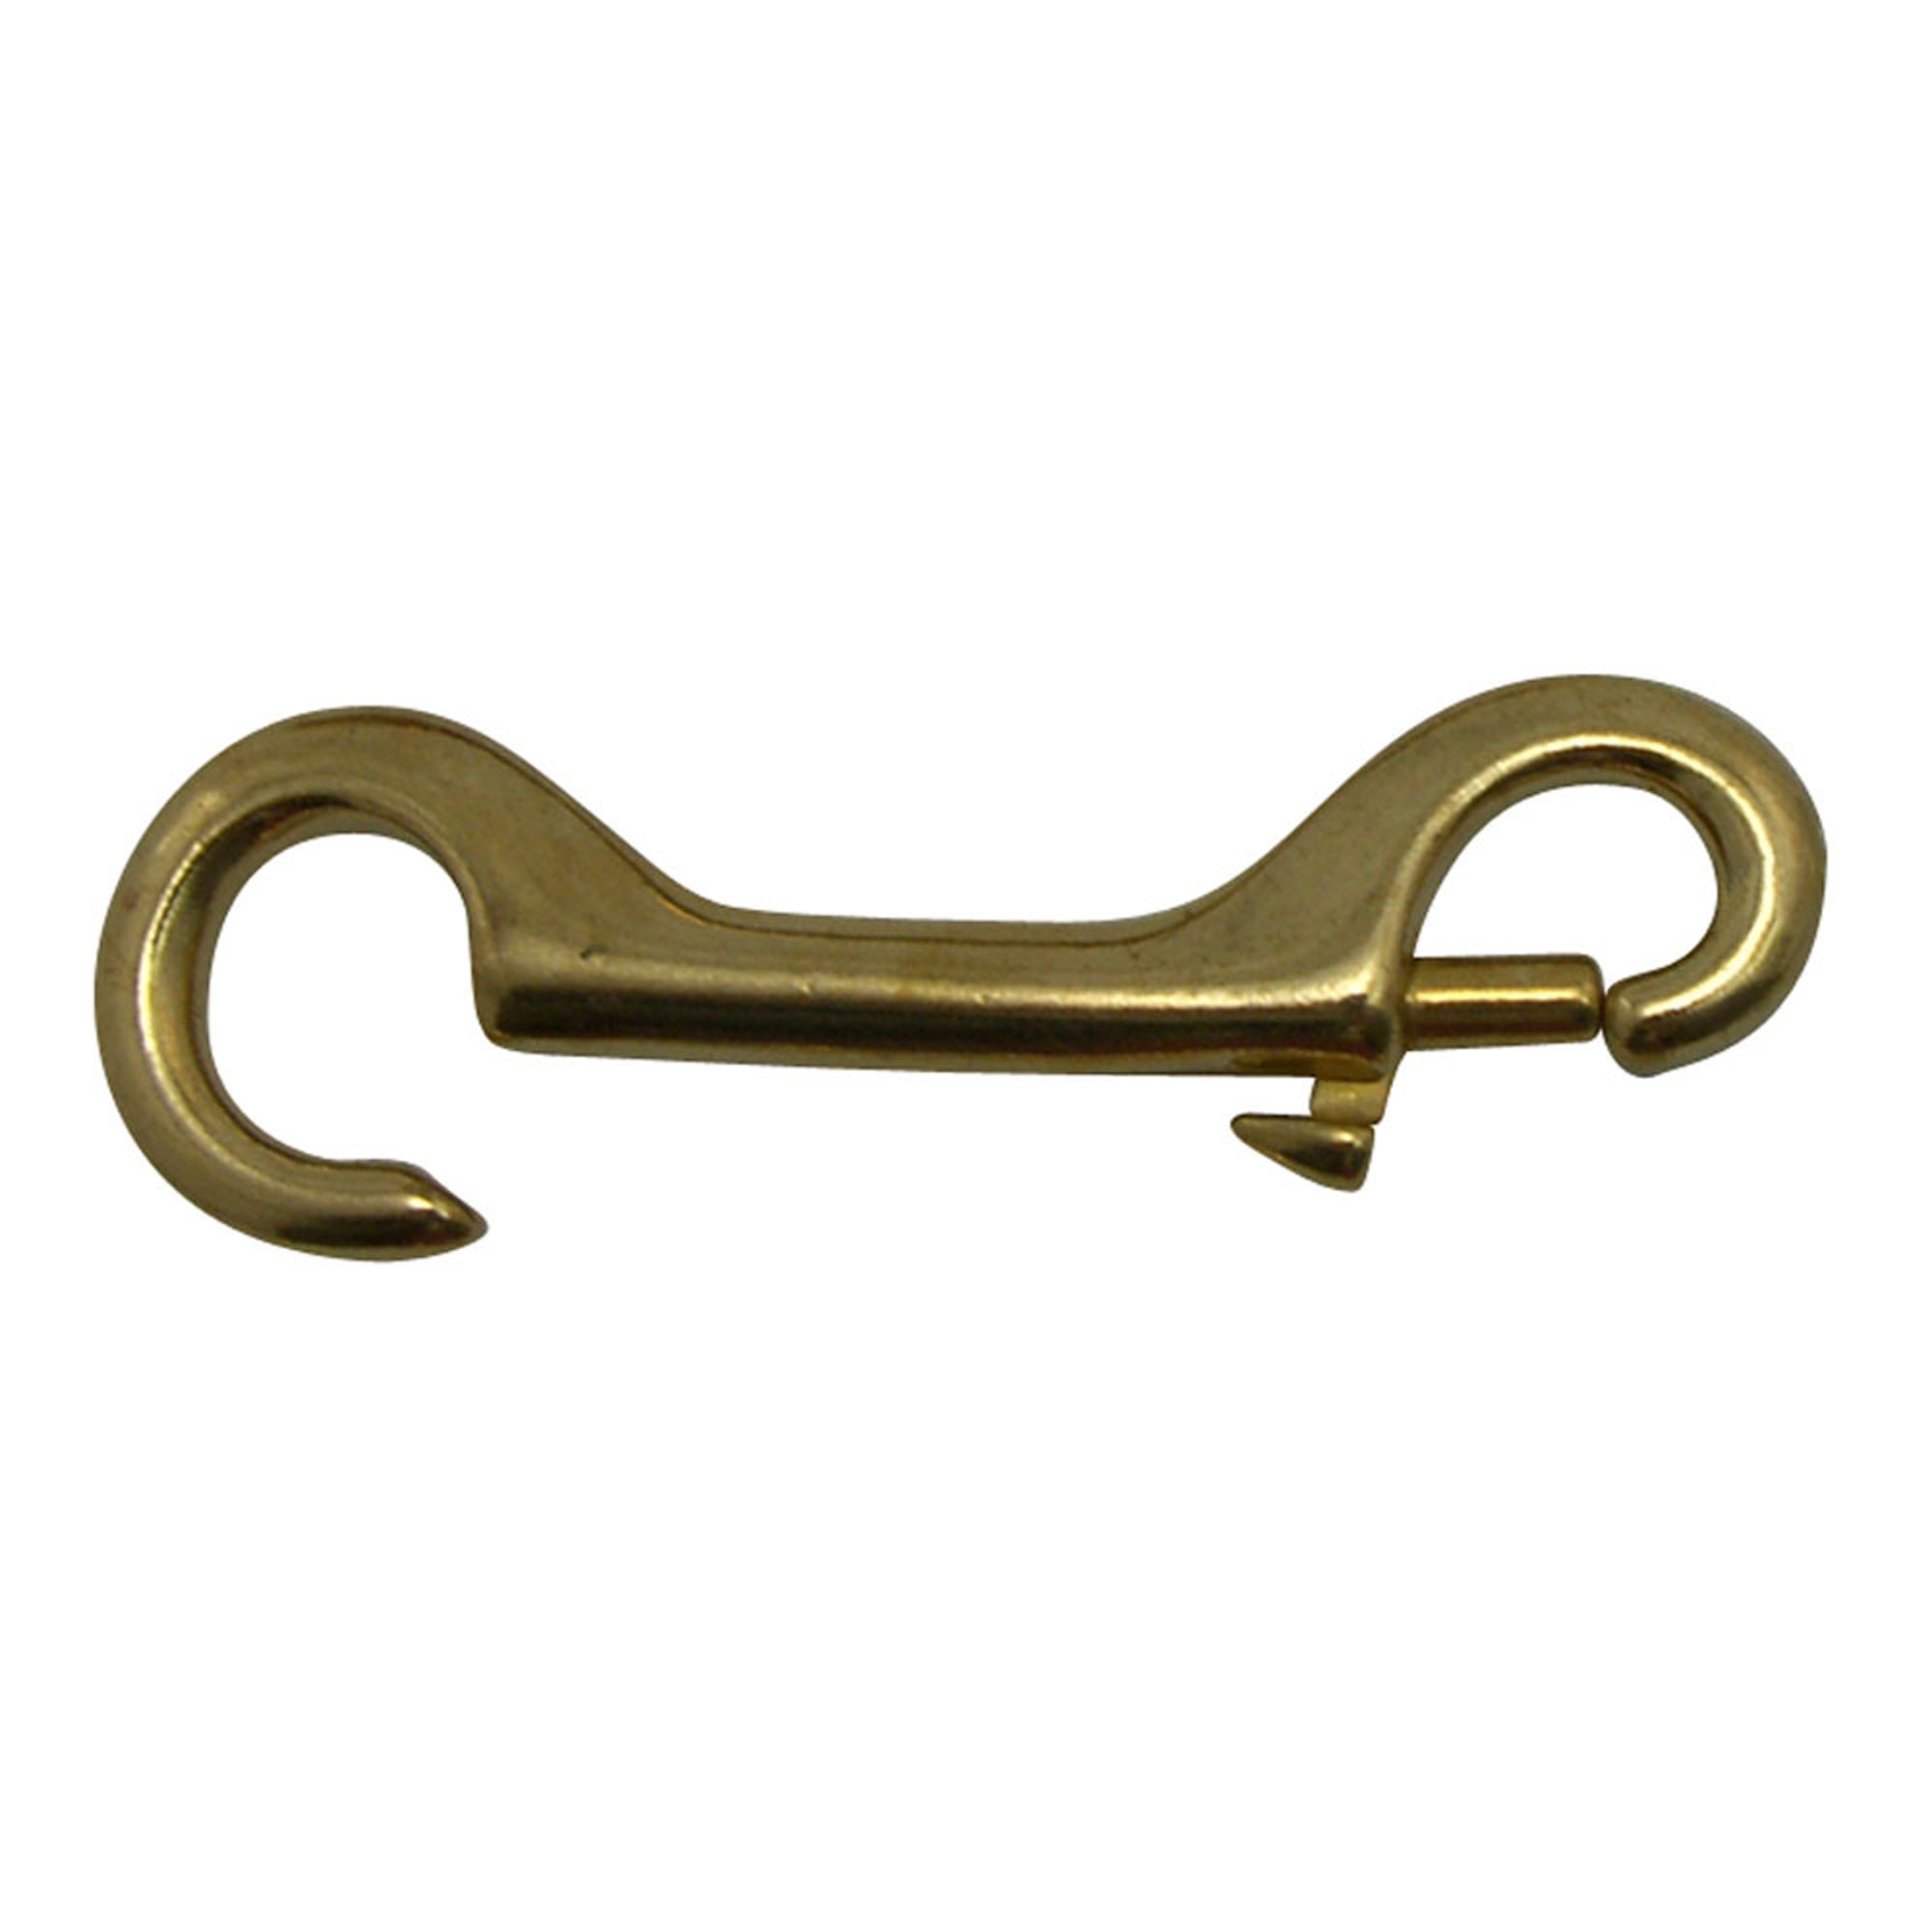 #232 Solid Brass Open End Snap 4" x 5/8"